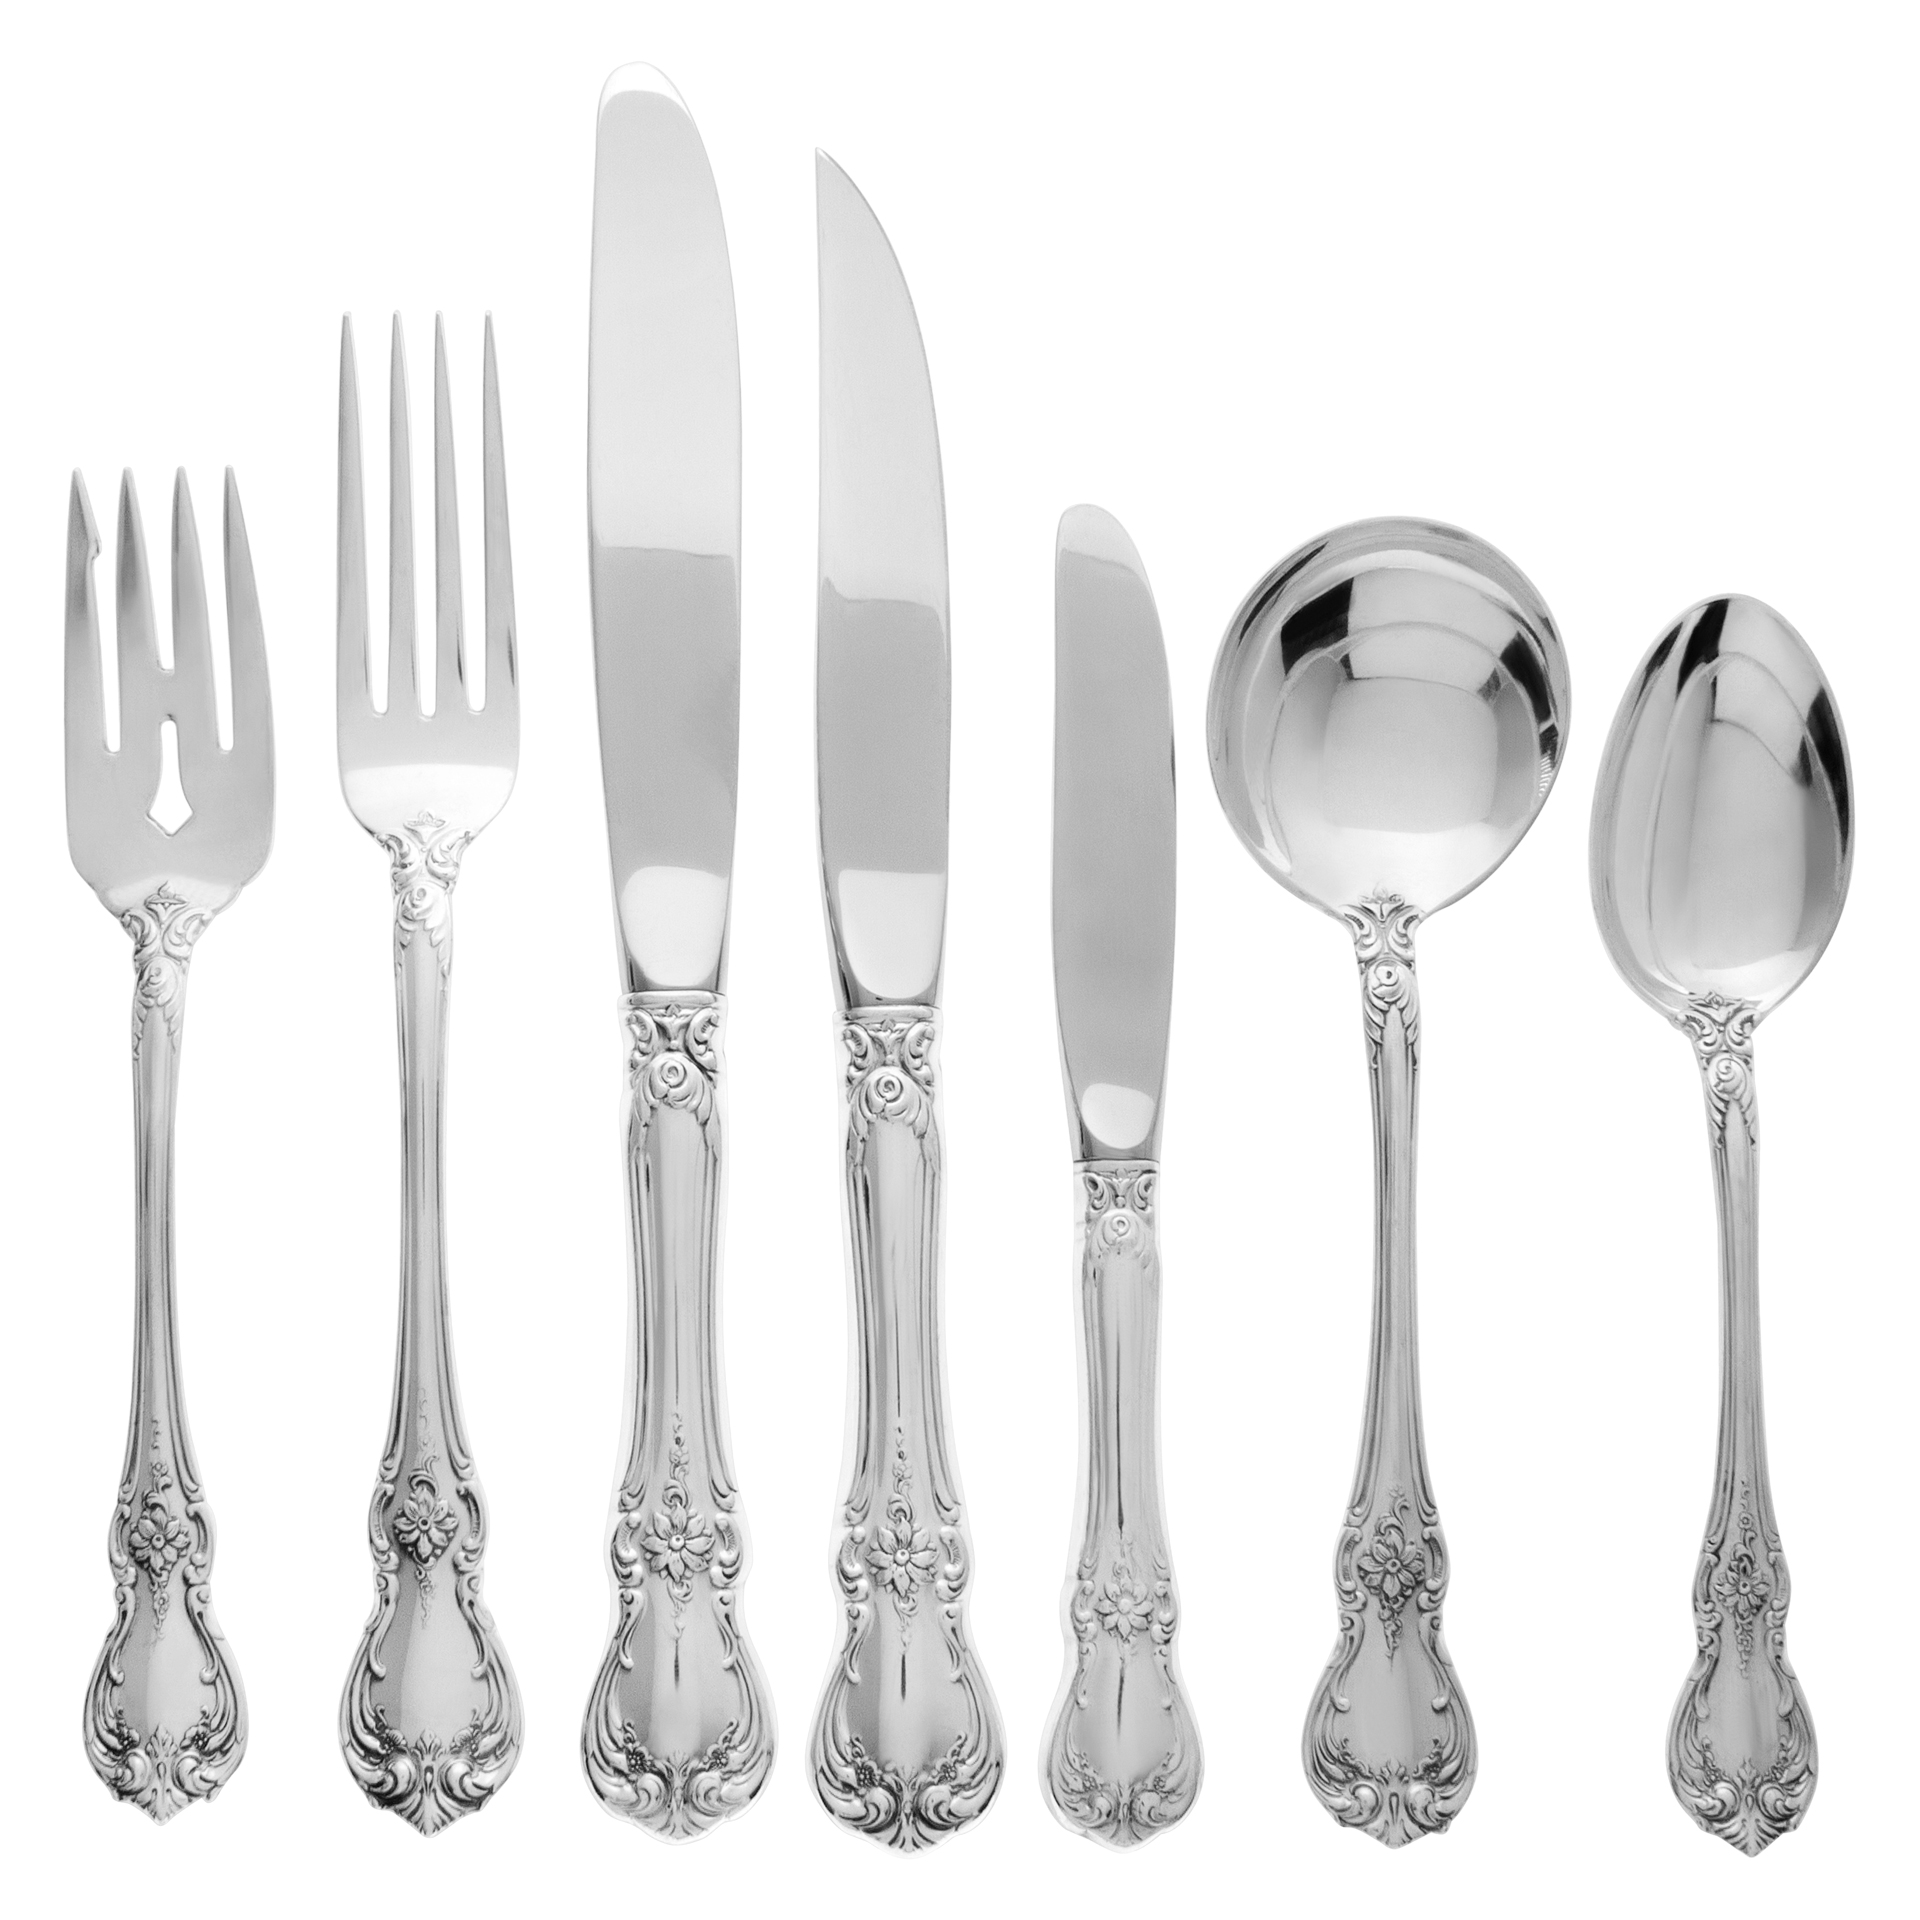 TOWLE OLD MASTER STERLING SILVER FOUR PIECE PLACE SETTING NO MONOGRAM 